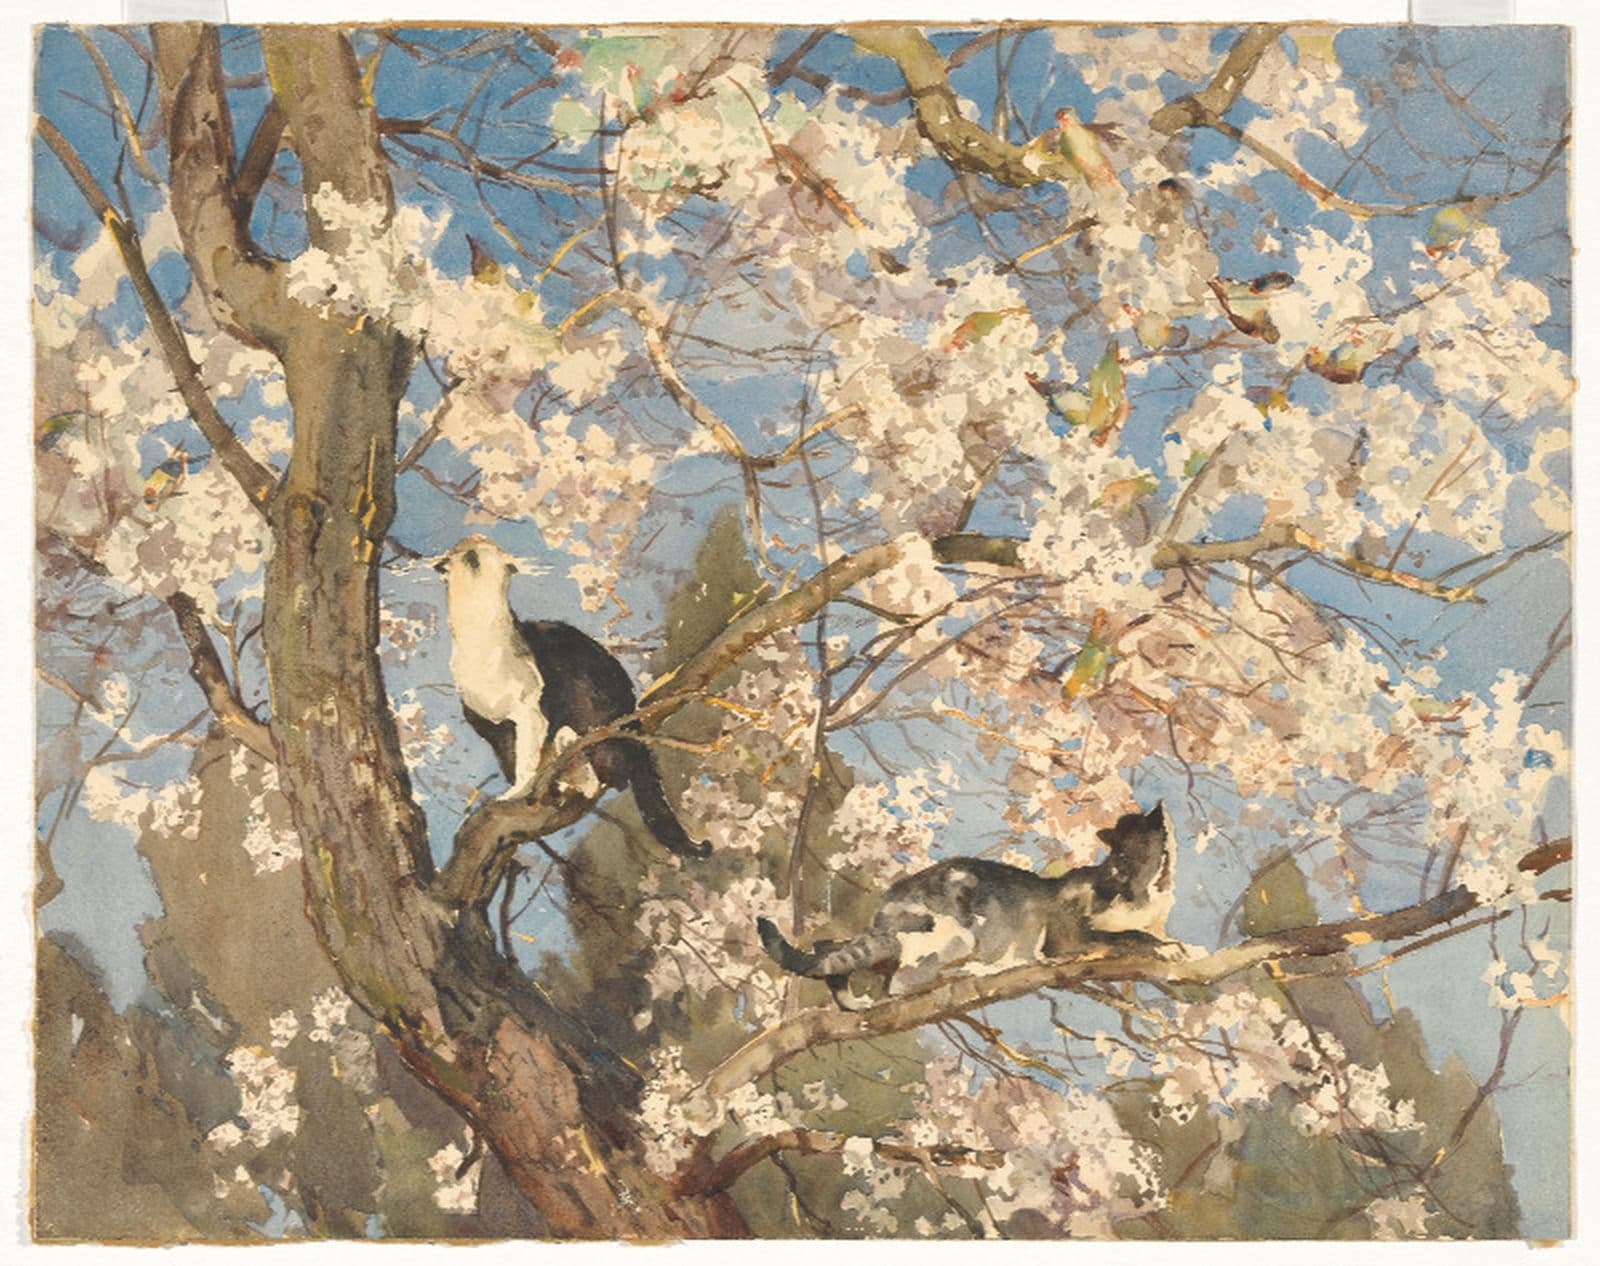 Two cats and lots of birds in a tree that is blossoming with white flowers